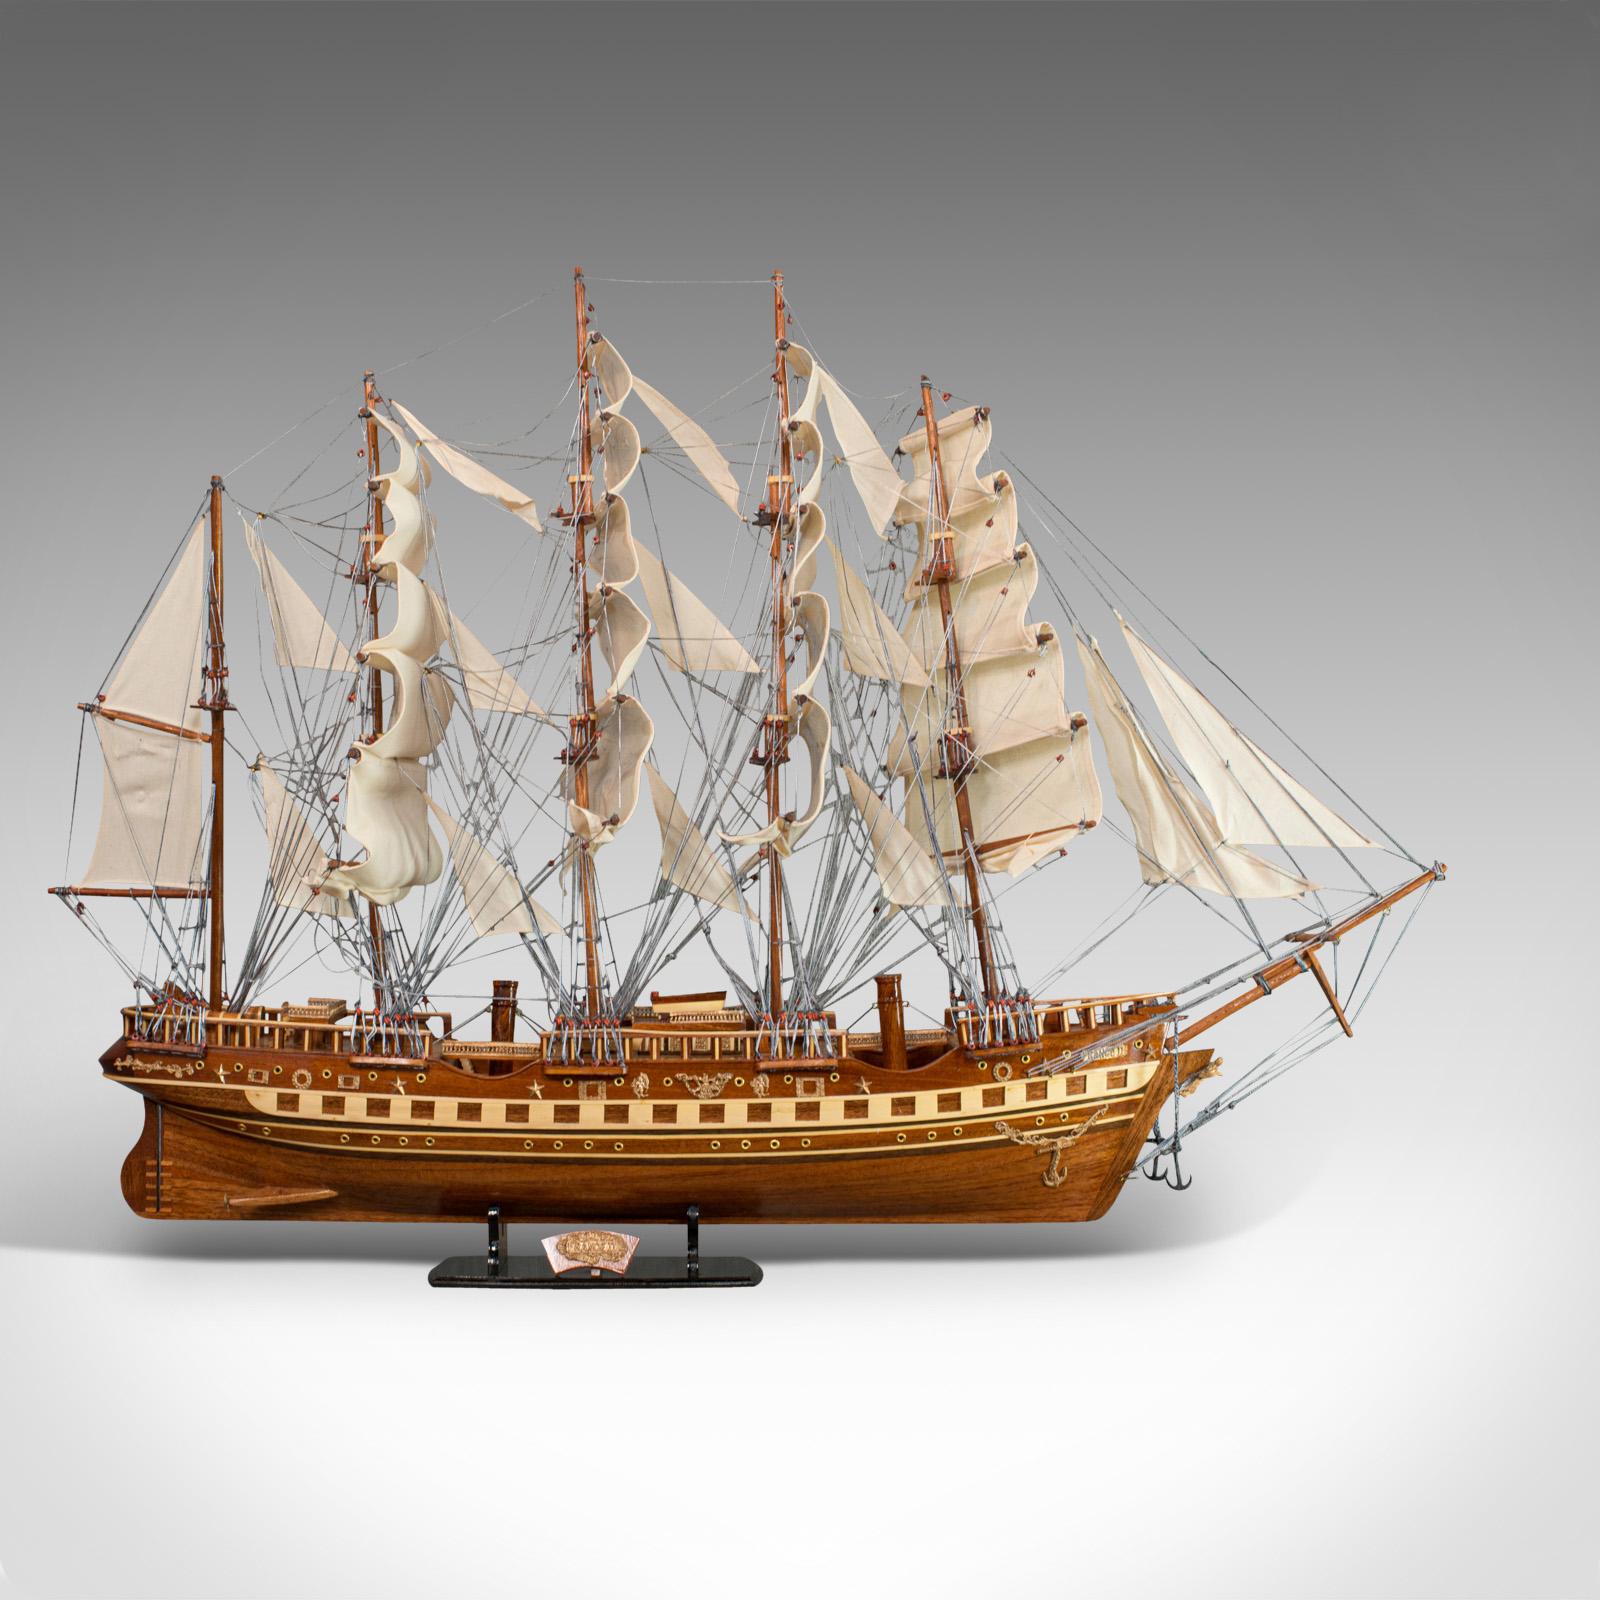 This is a large vintage model of France II. An English, mahogany collectible ship model on display Stand and dating to the 20th century.

France II held the record for the greatest weight capacity of any merchant sailing ship. A five-mast barque